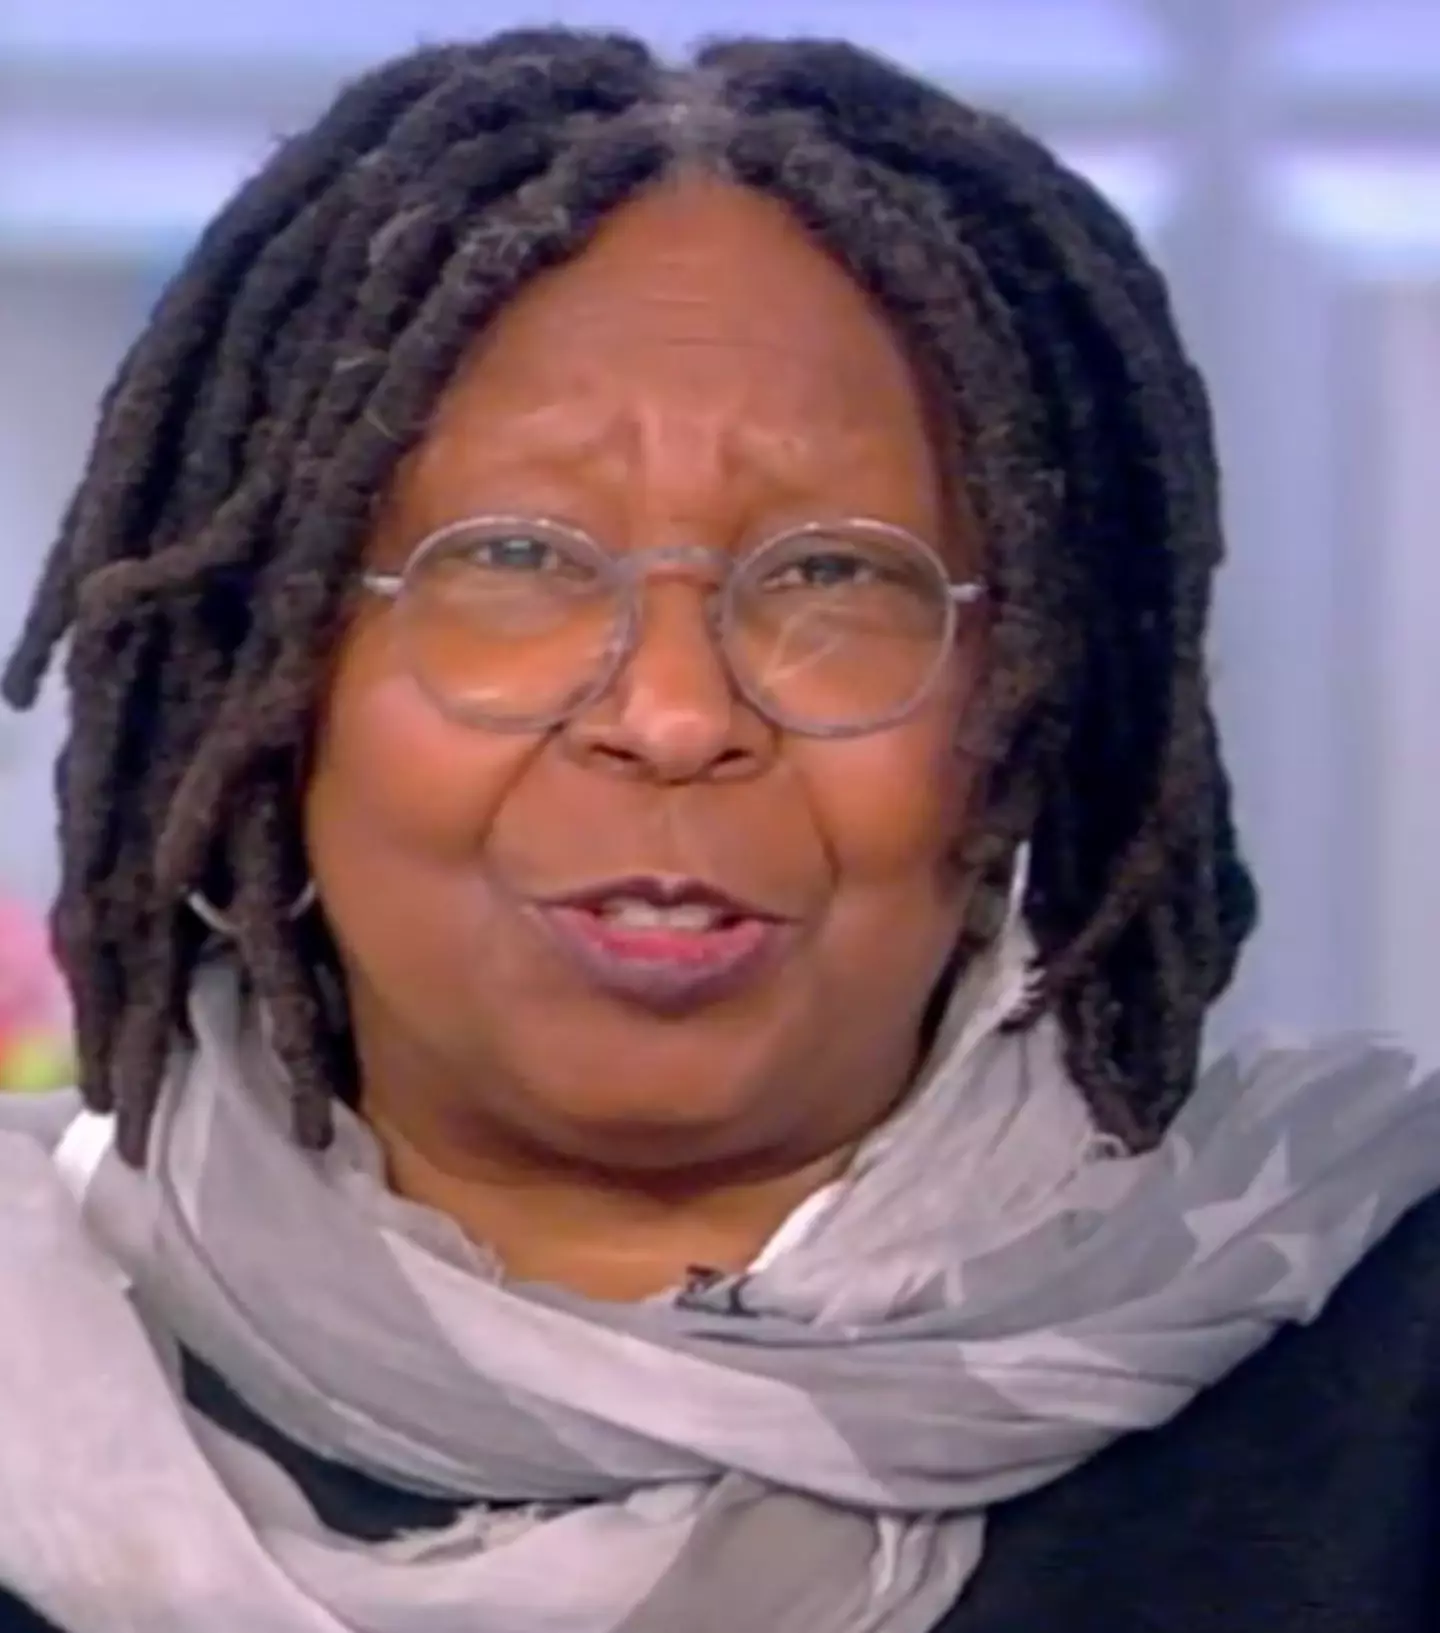 Whoopi Goldberg co-hosted the show with O'Donnell.